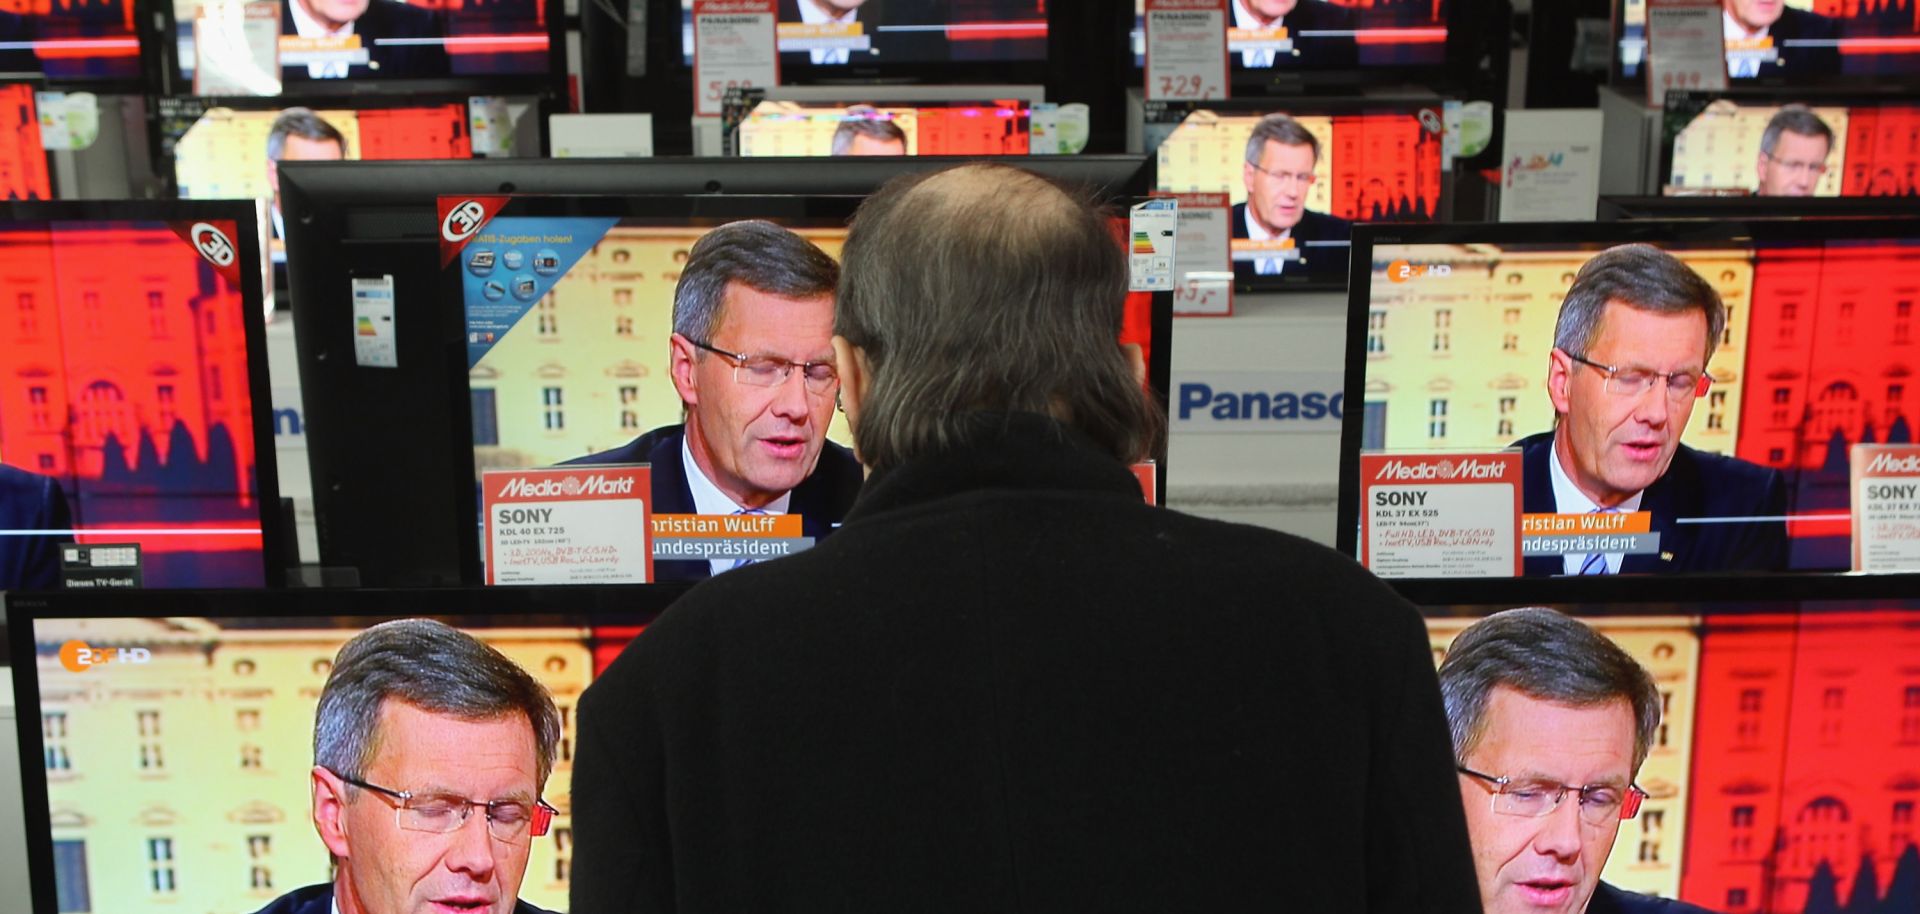 A shopper stops to watch the news in the window of an electronics store.